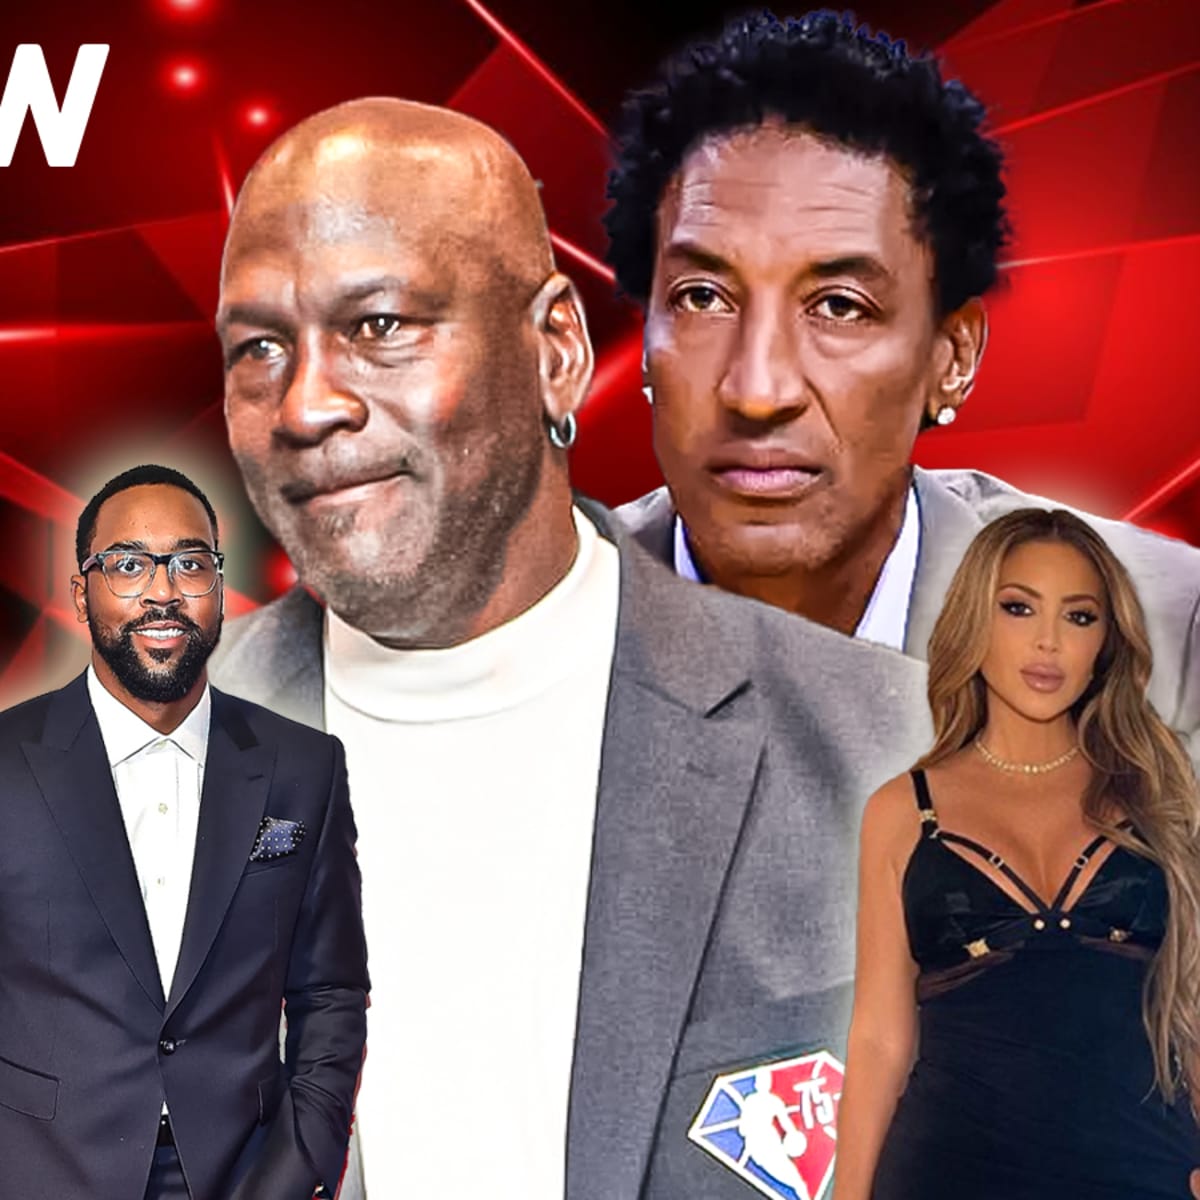 NBA Fans React To Michael Jordan's Son Reportedly Dating Scottie Pippen's  Ex-Wife: MJ Took That Personal And Sent His Son To Date Pippen's Ex-Wife  - Fadeaway World